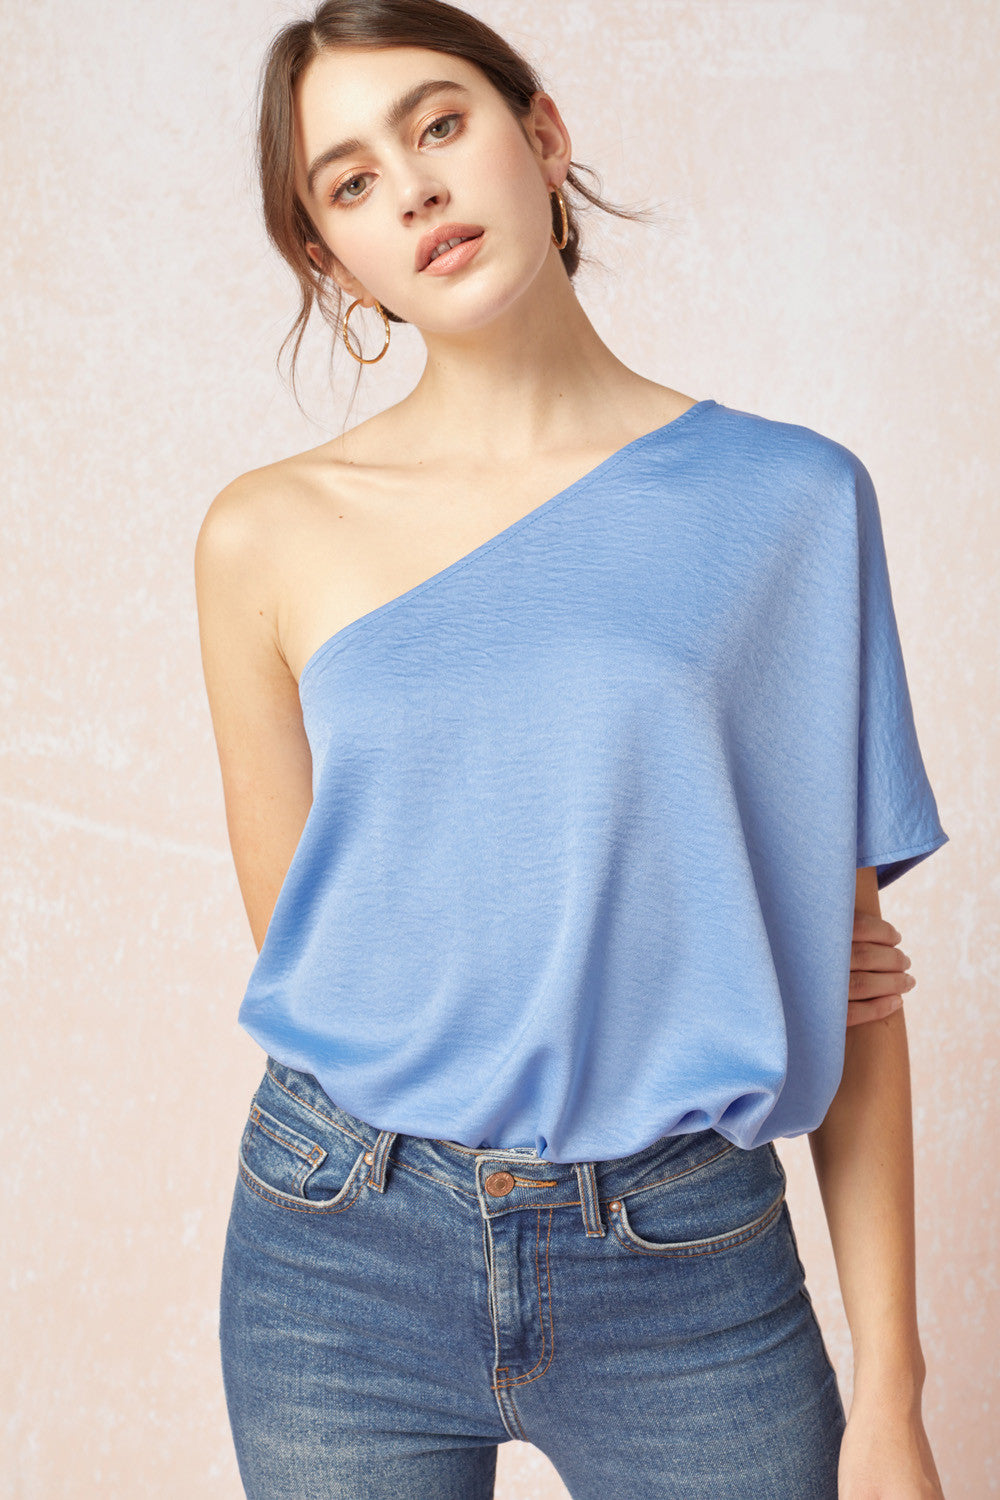 One Shoulder Draped Top Chambray